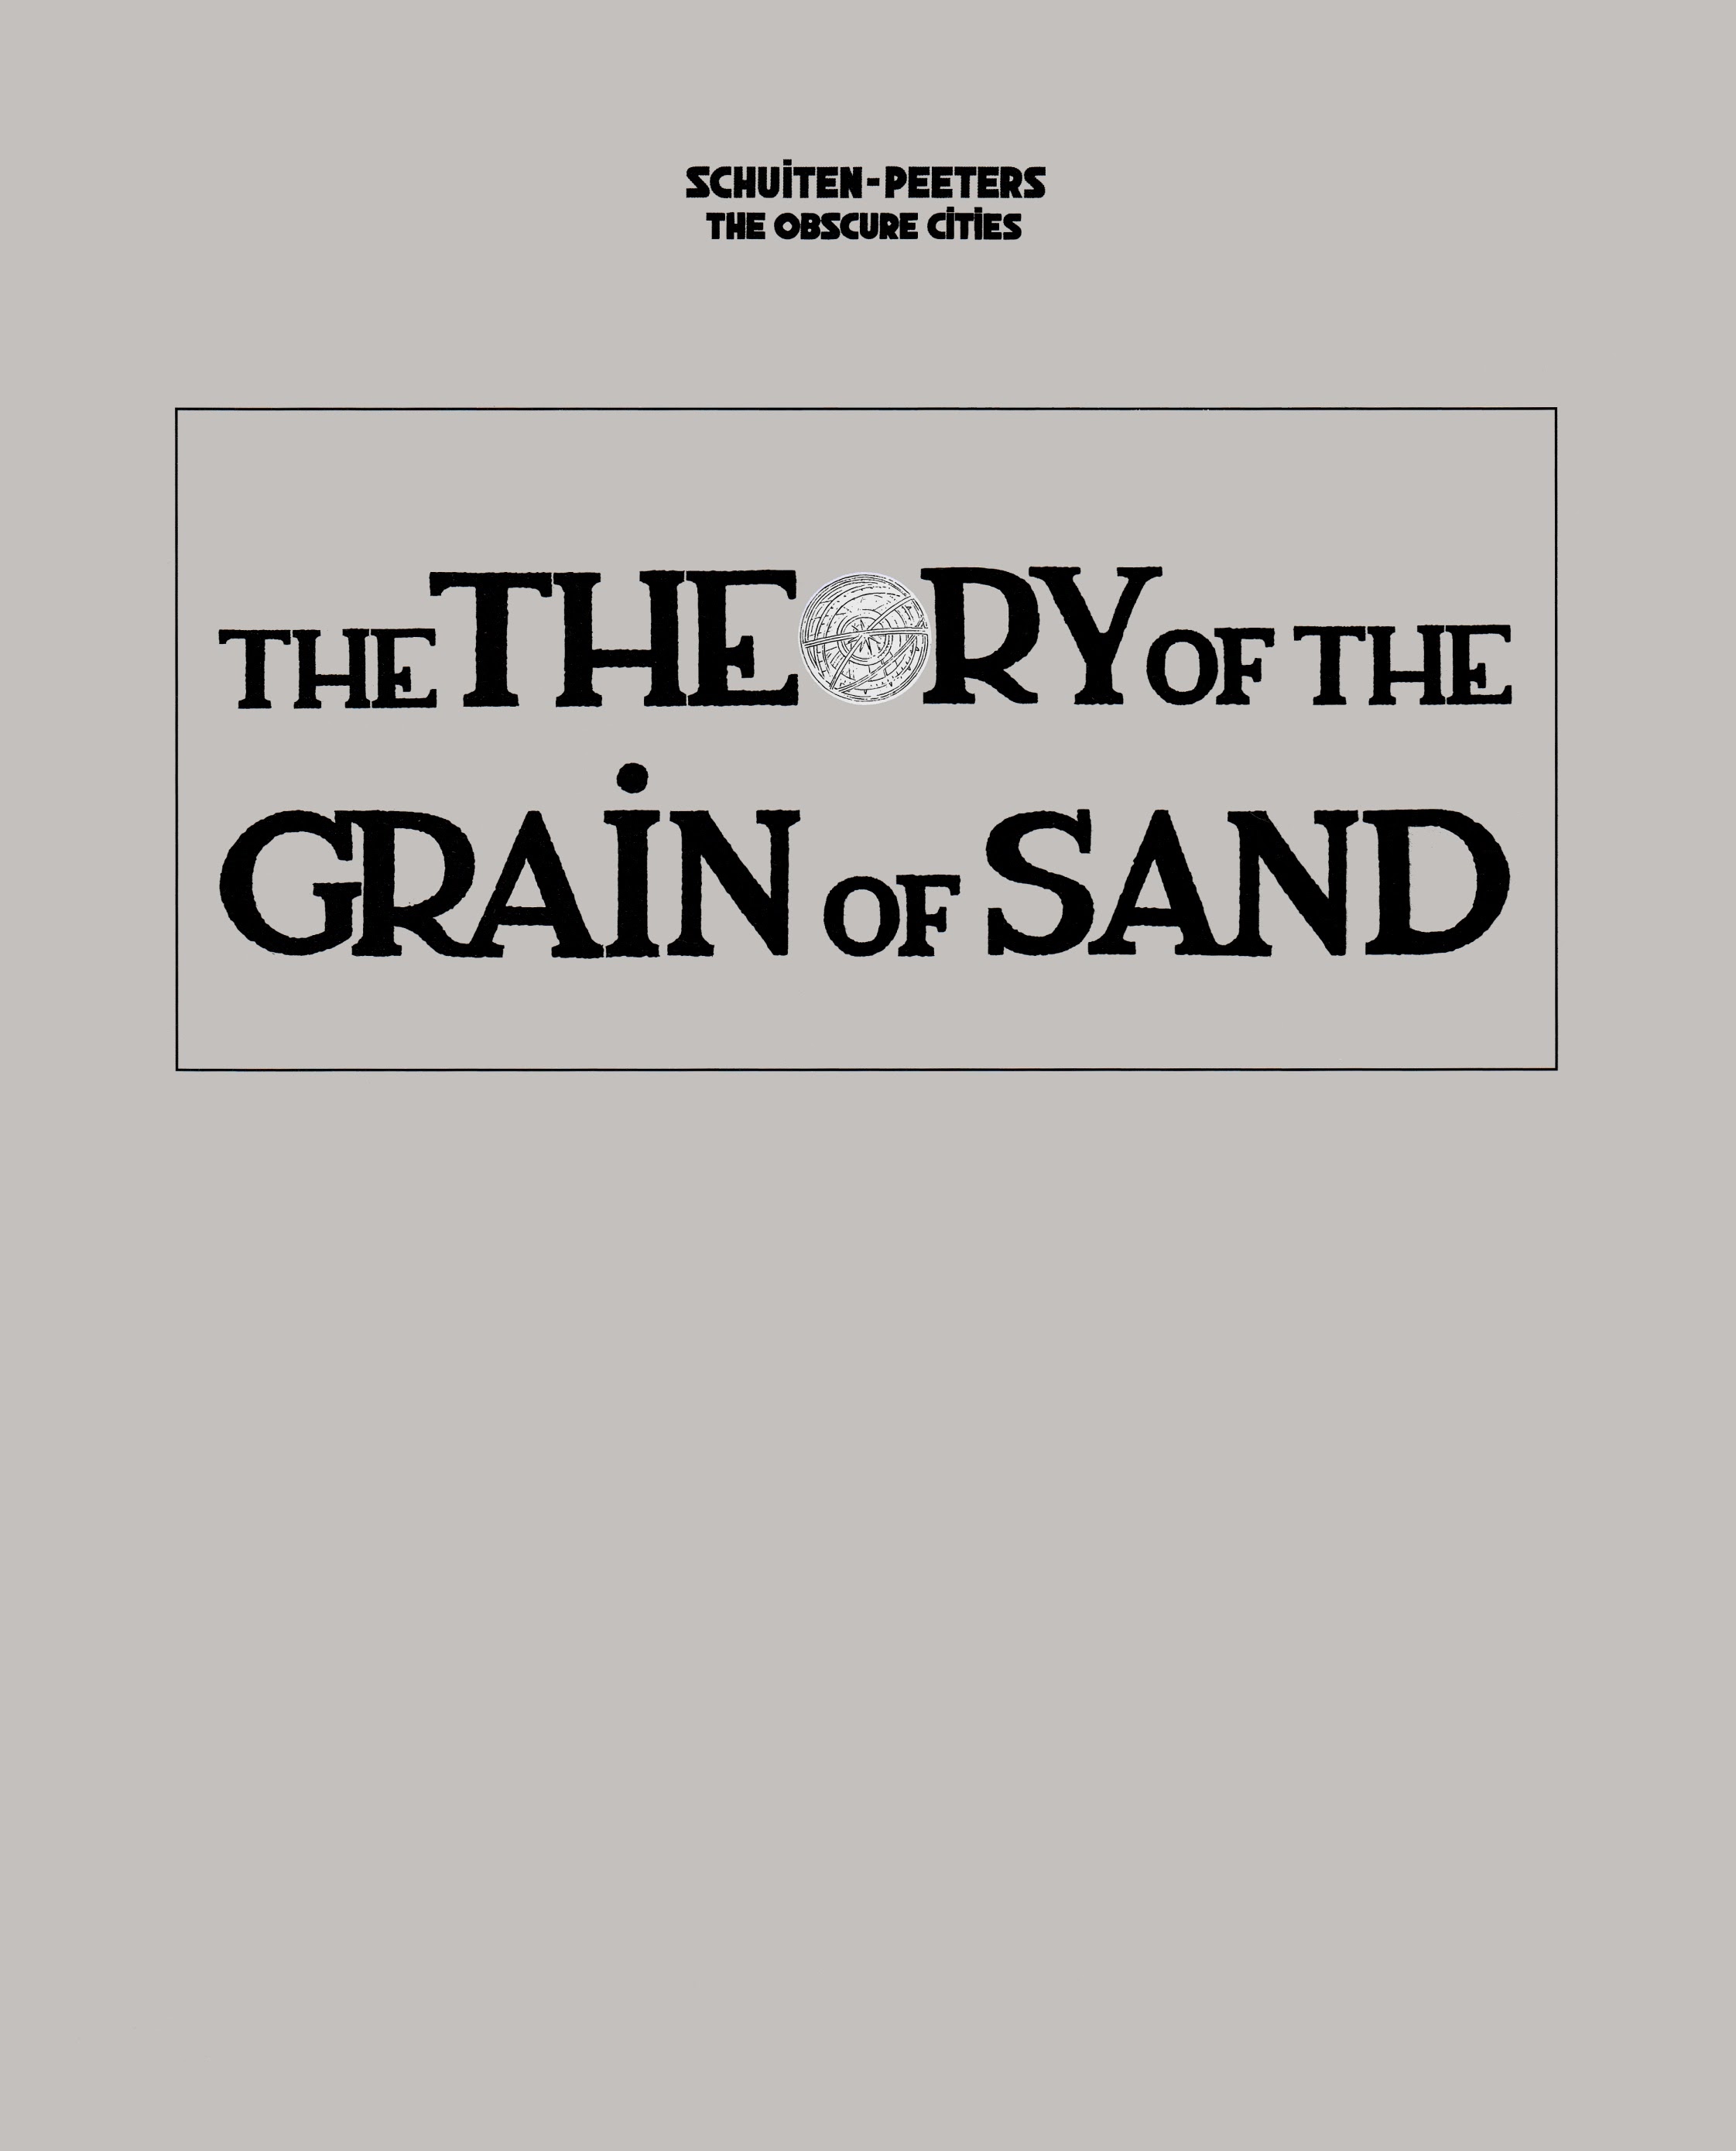 Read online Theory of the Grain of Sand comic -  Issue # TPB - 6